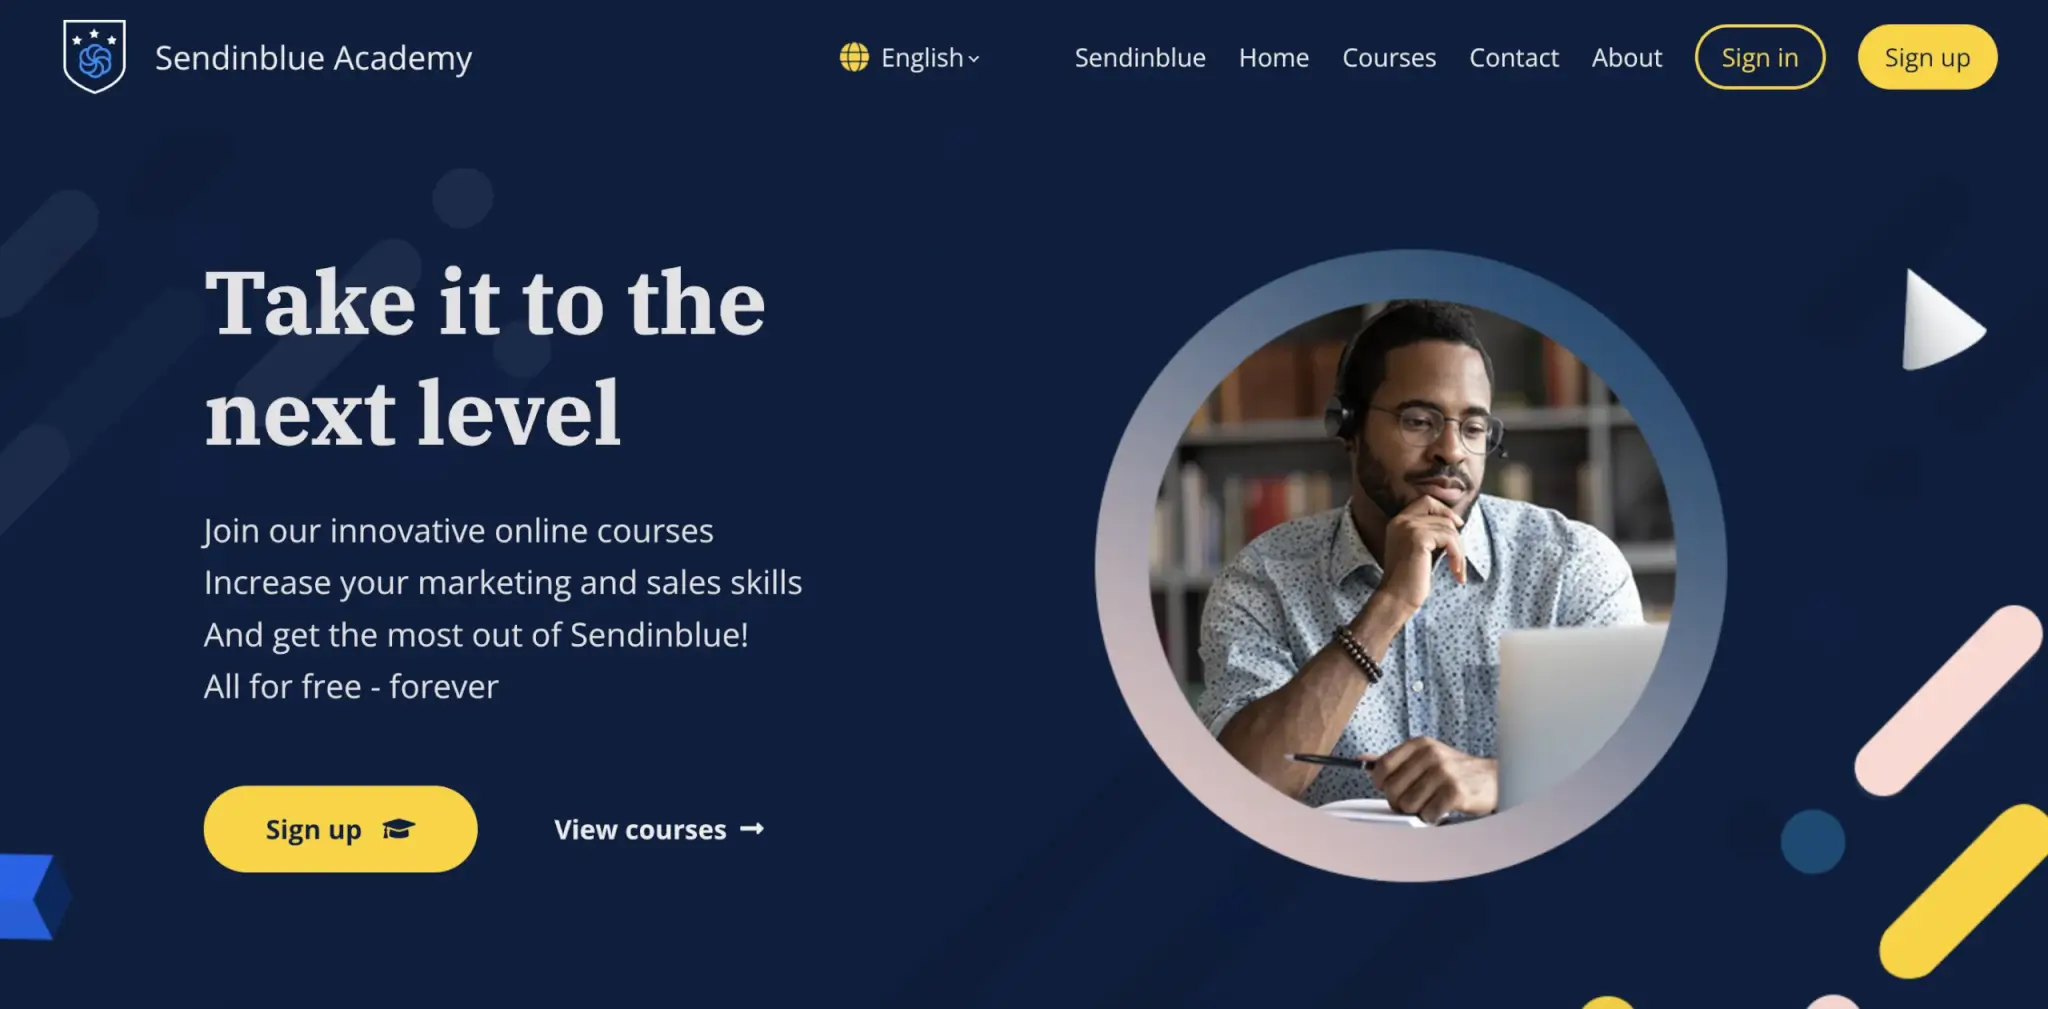 a screenshot of the Sendinblue Academy landing page showing a man with laptop and headphones